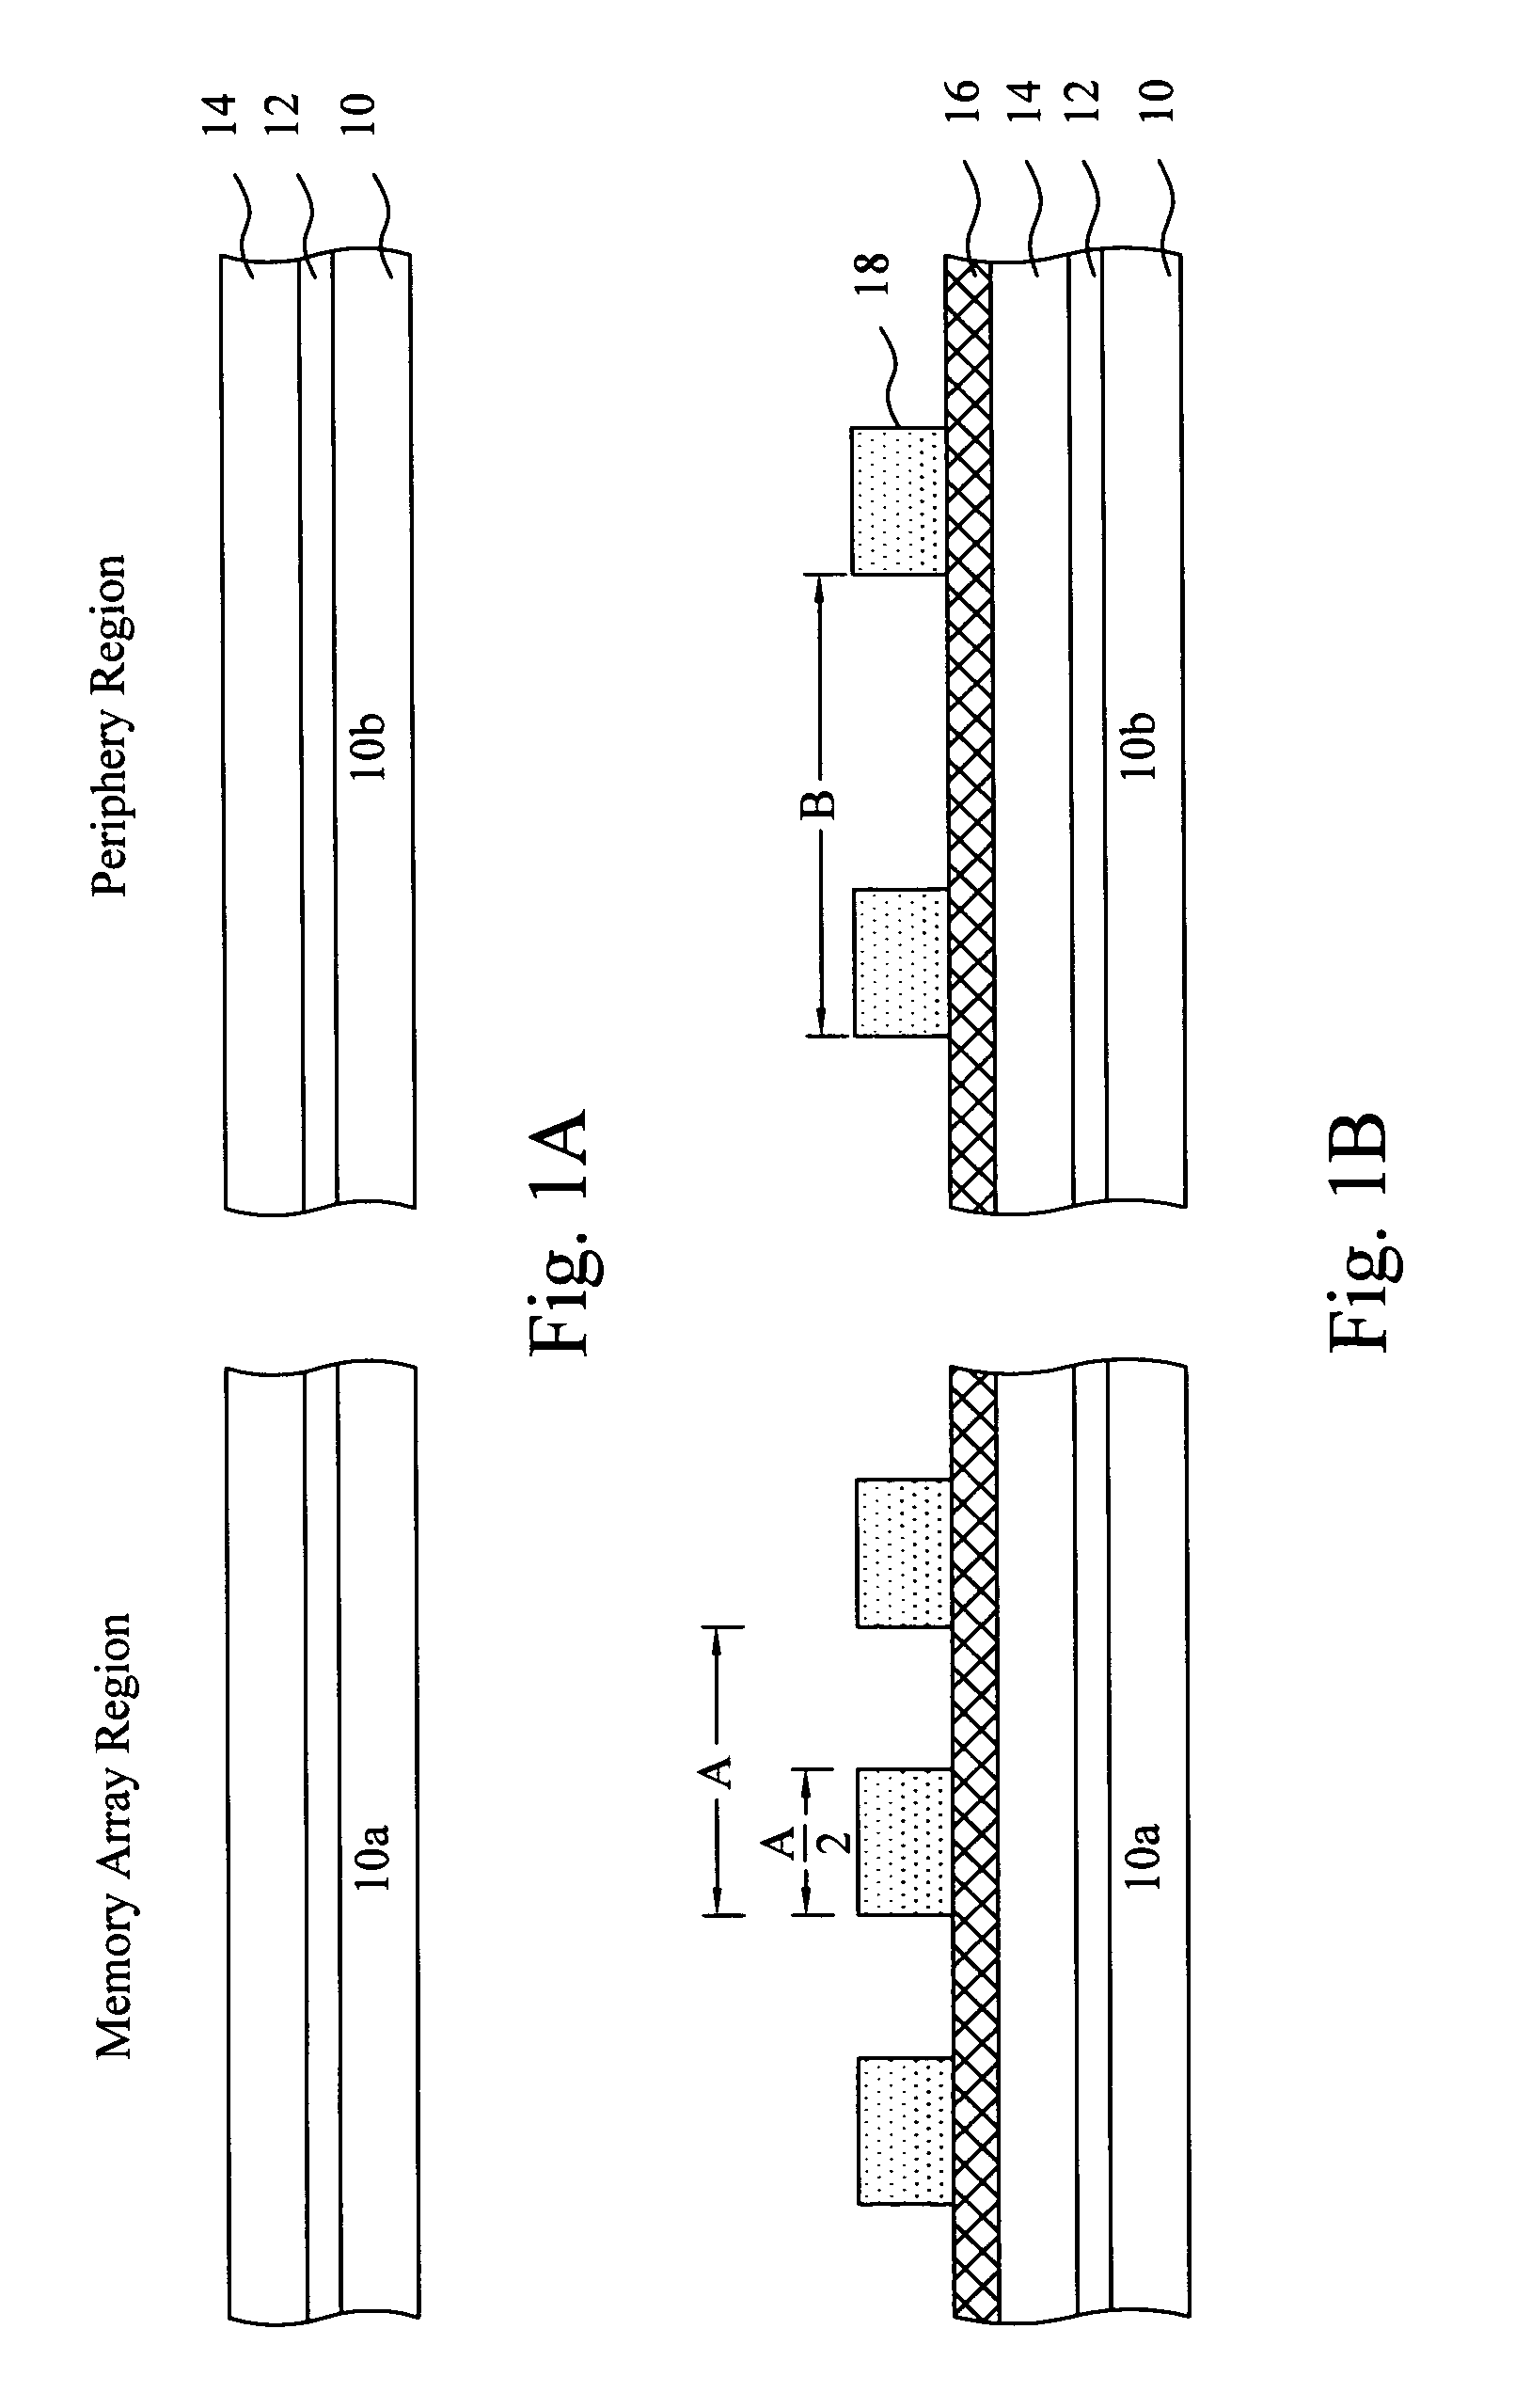 Method for defining a minimum pitch in an integrated circuit beyond photolithographic resolution